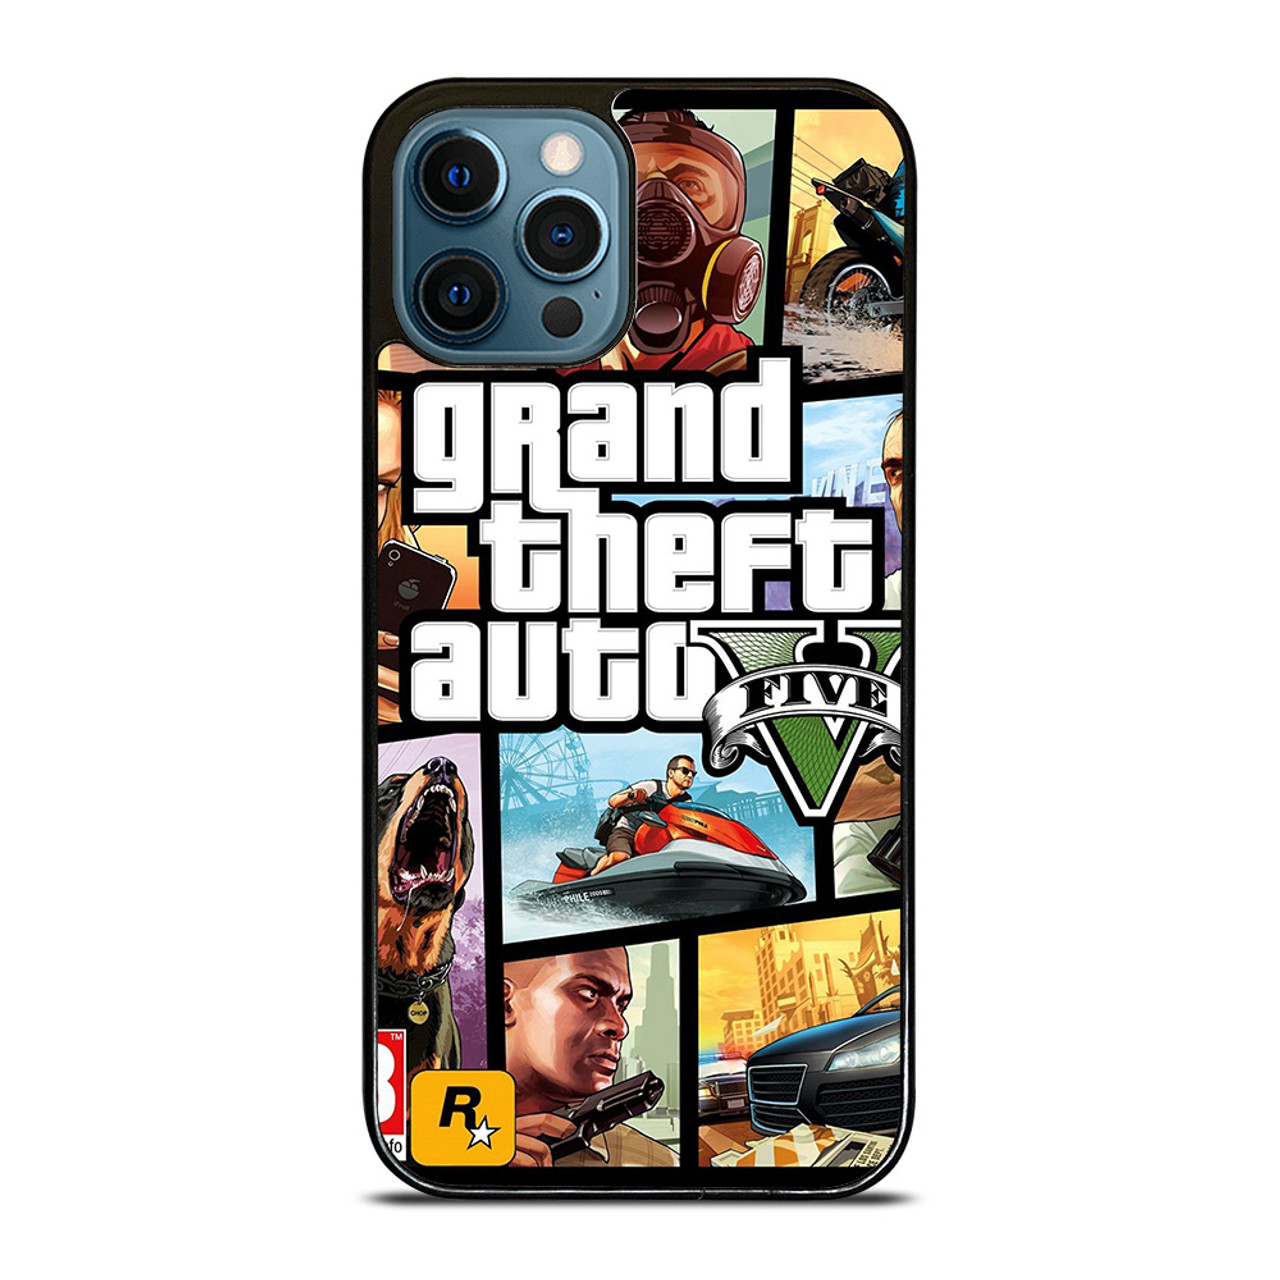 LSPD (Grand Theft Auto V) iPhone Case for Sale by Ent-Clothing